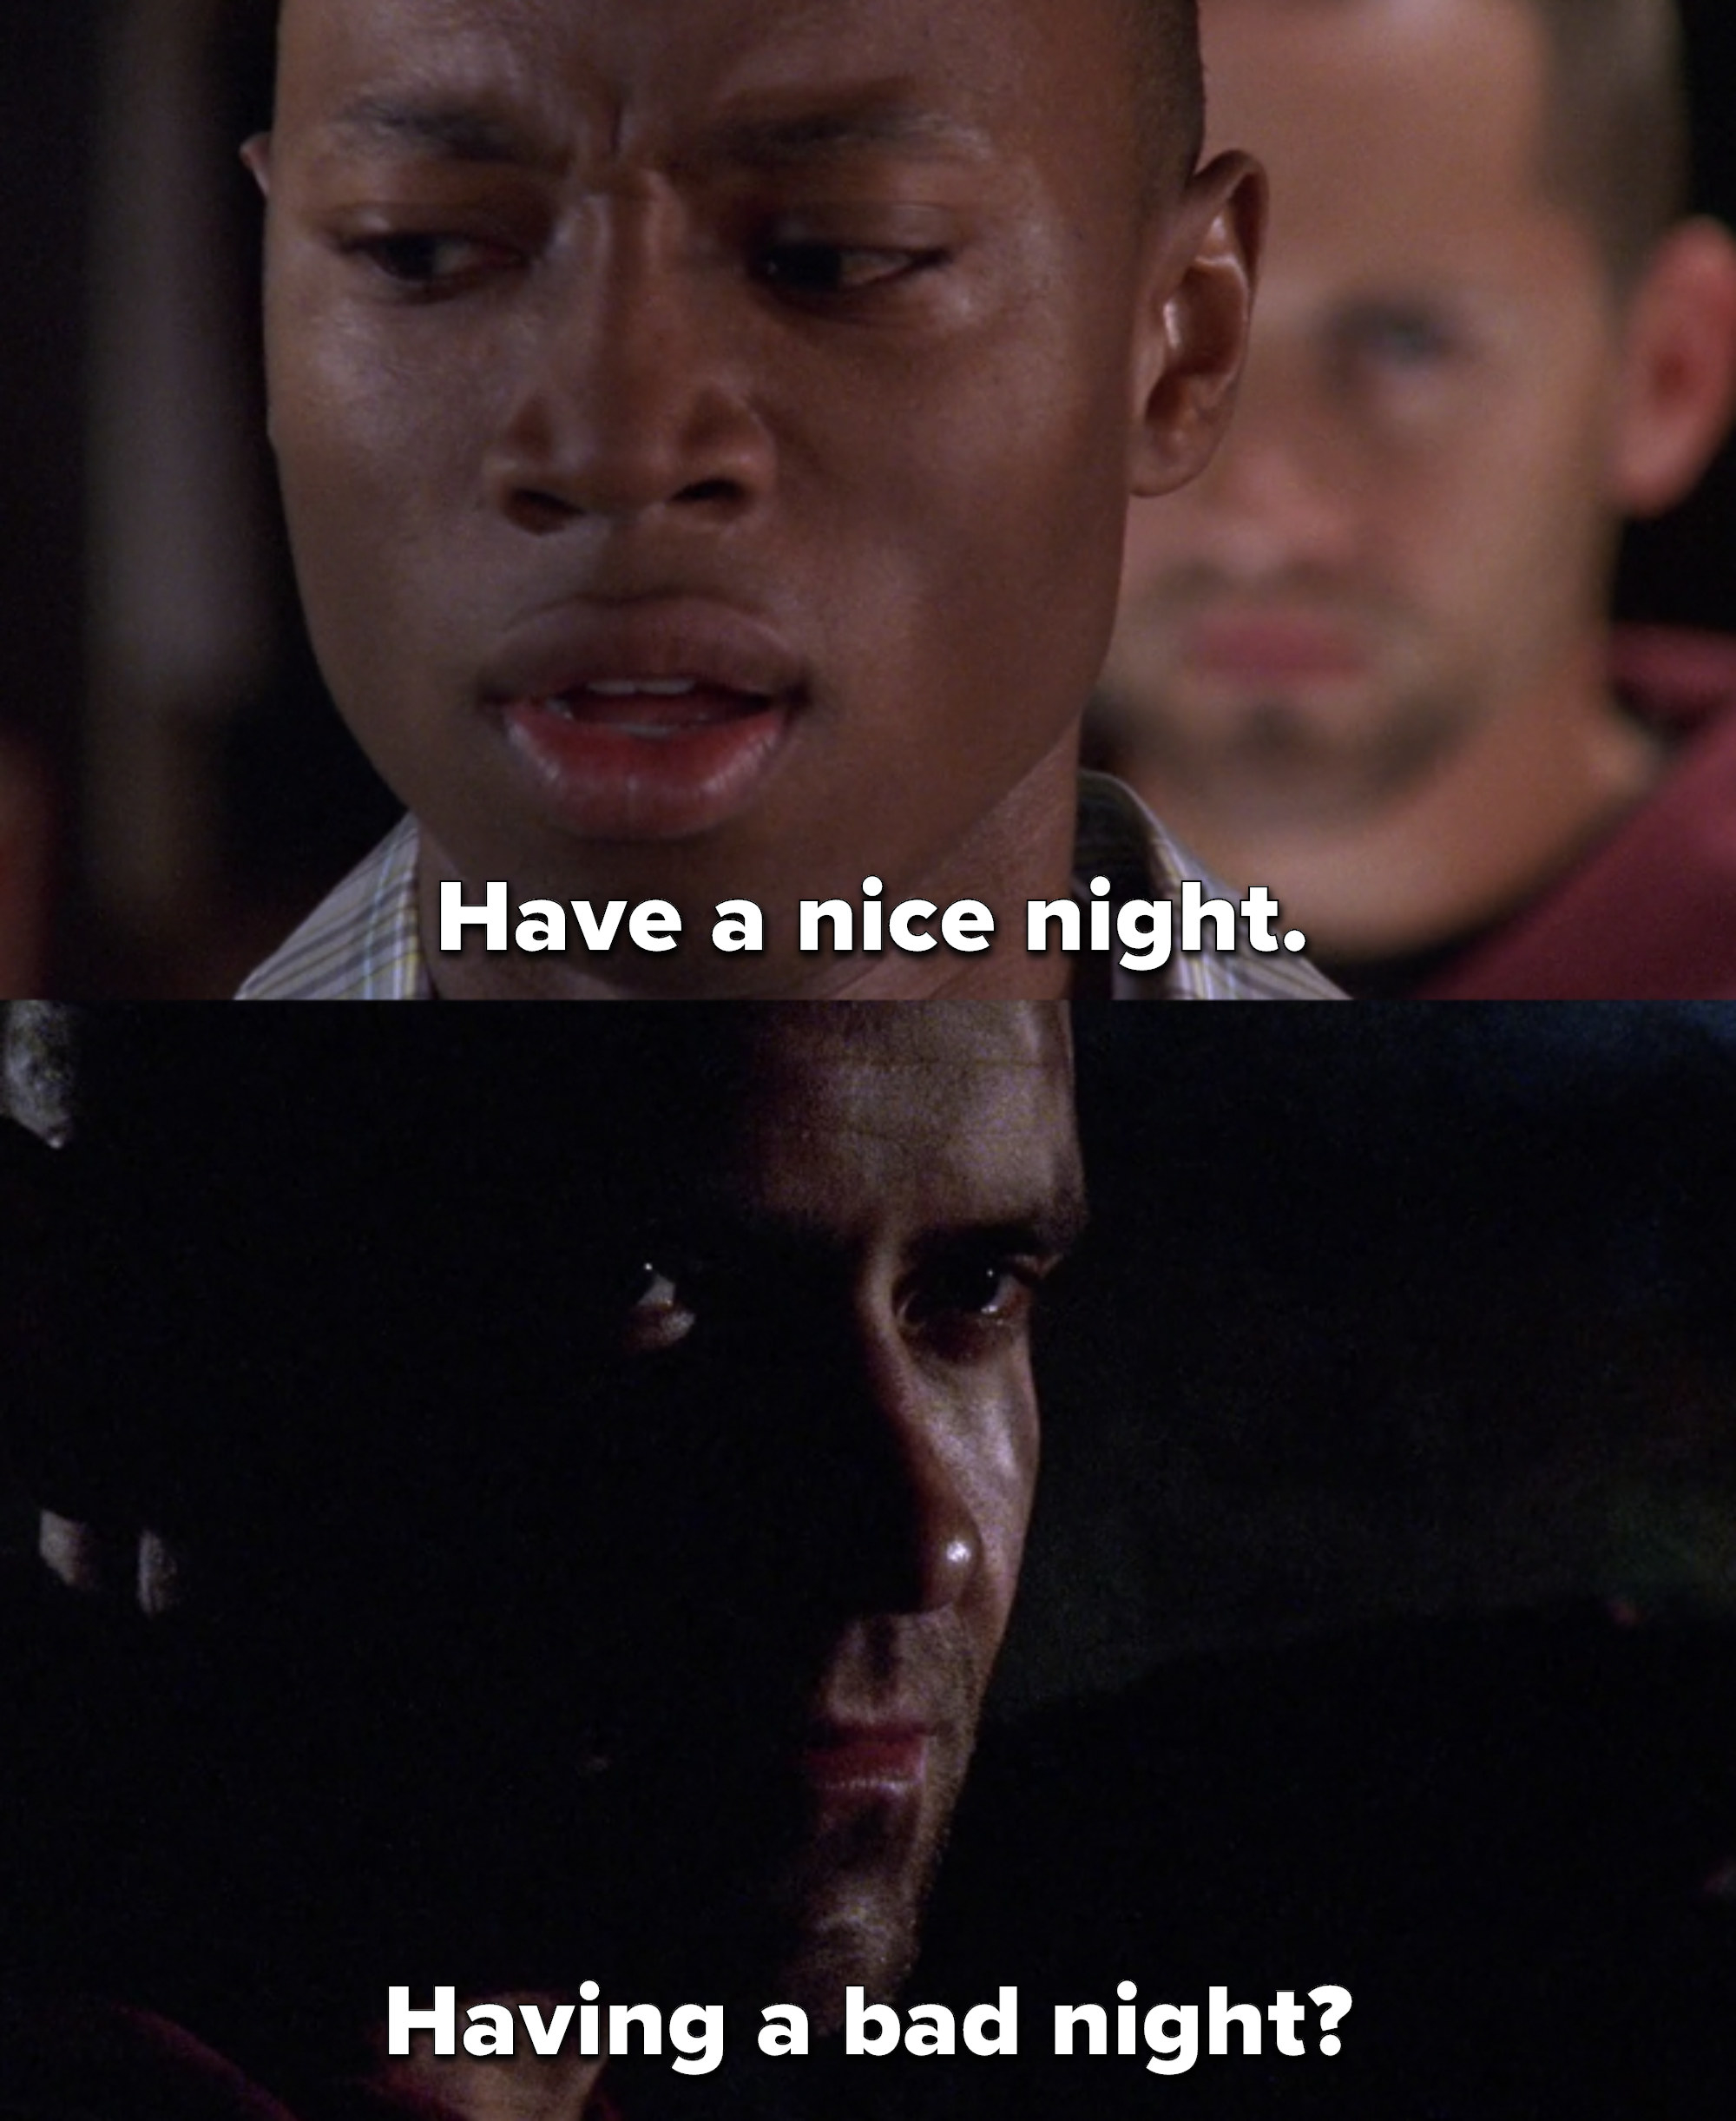 in a flashback, Xavier says &quot;Have a nice night&quot; to Quentin as he turns around afraid, and then asks Sam if she&#x27;s having a bad night